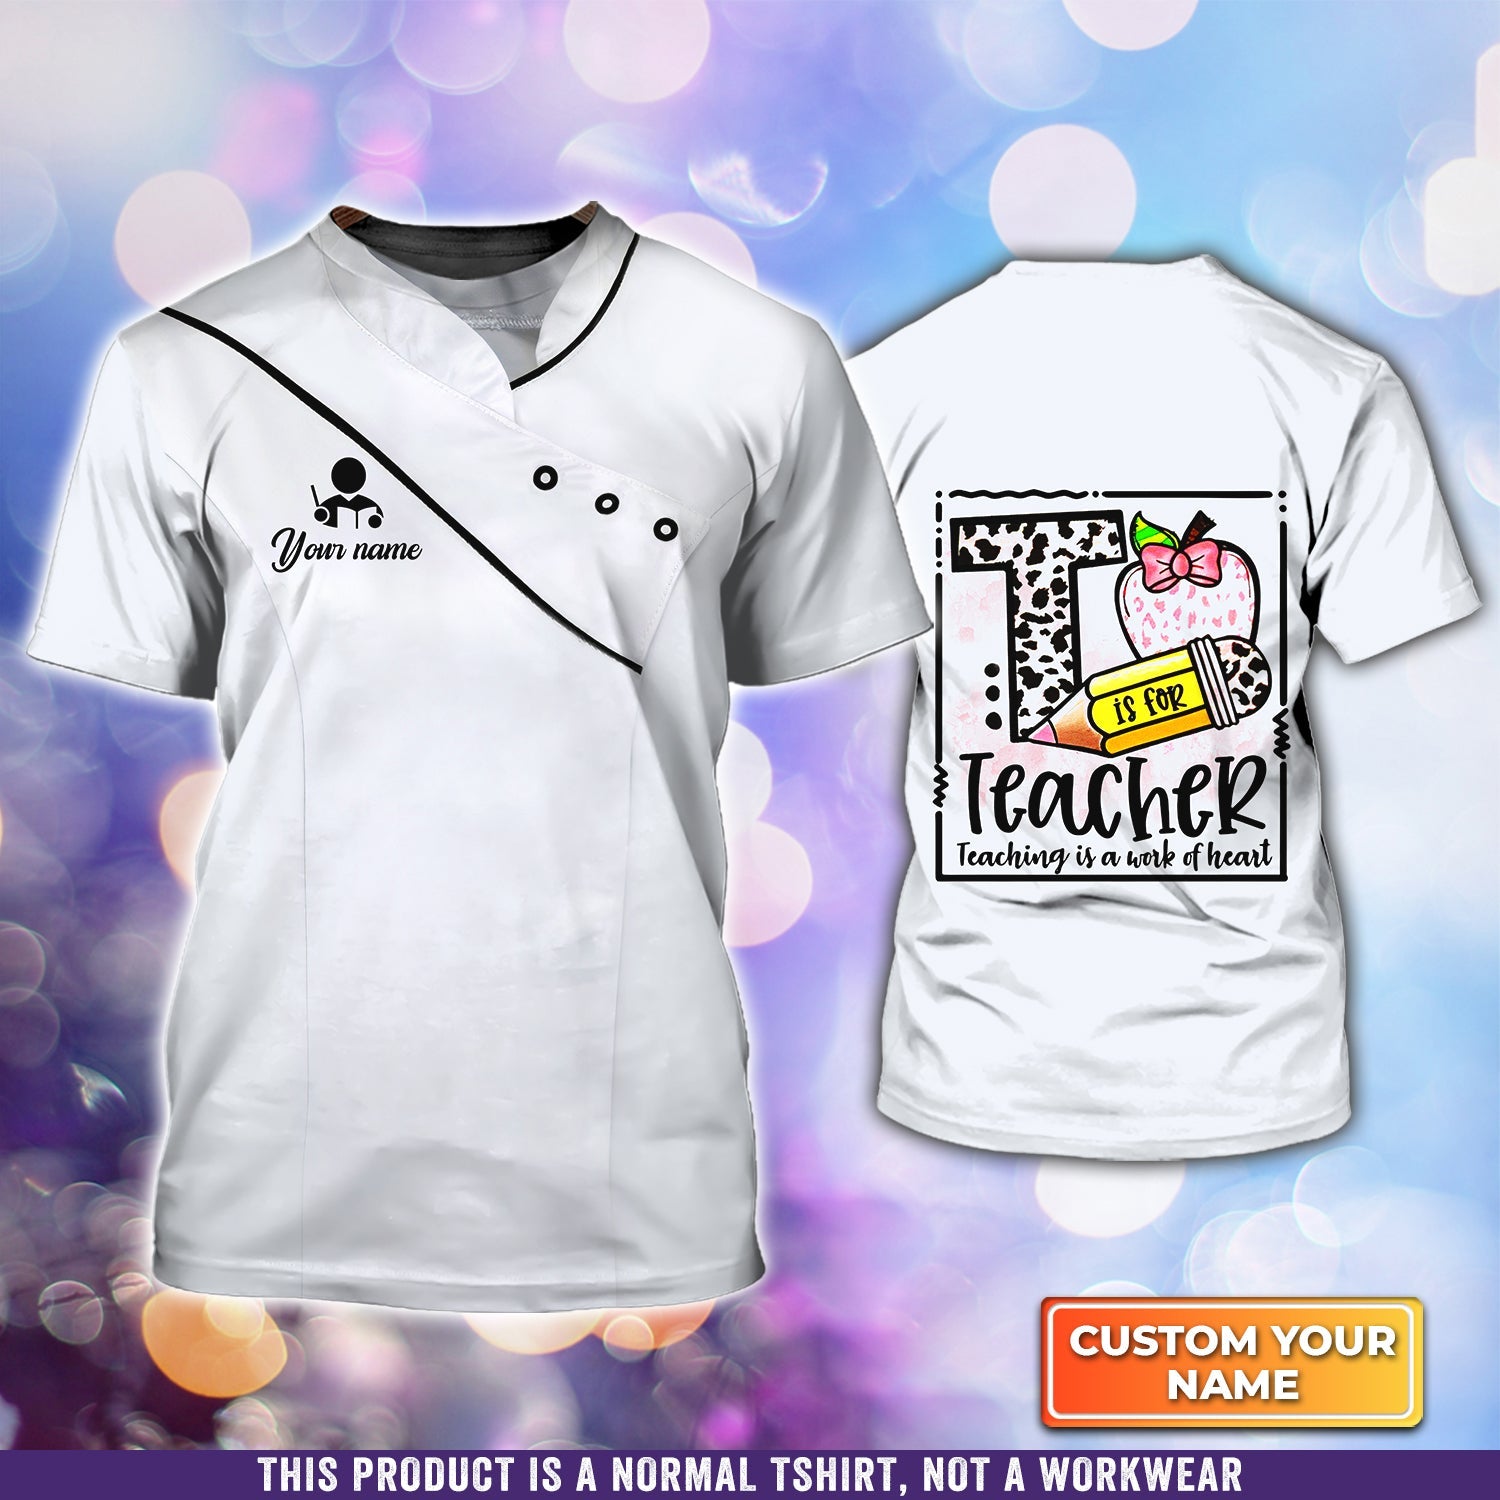 Teaching Is A Work At Heart Personalized Name 3D Tshirt/ Perfect Gift for Teacher/ Teacher Shirt